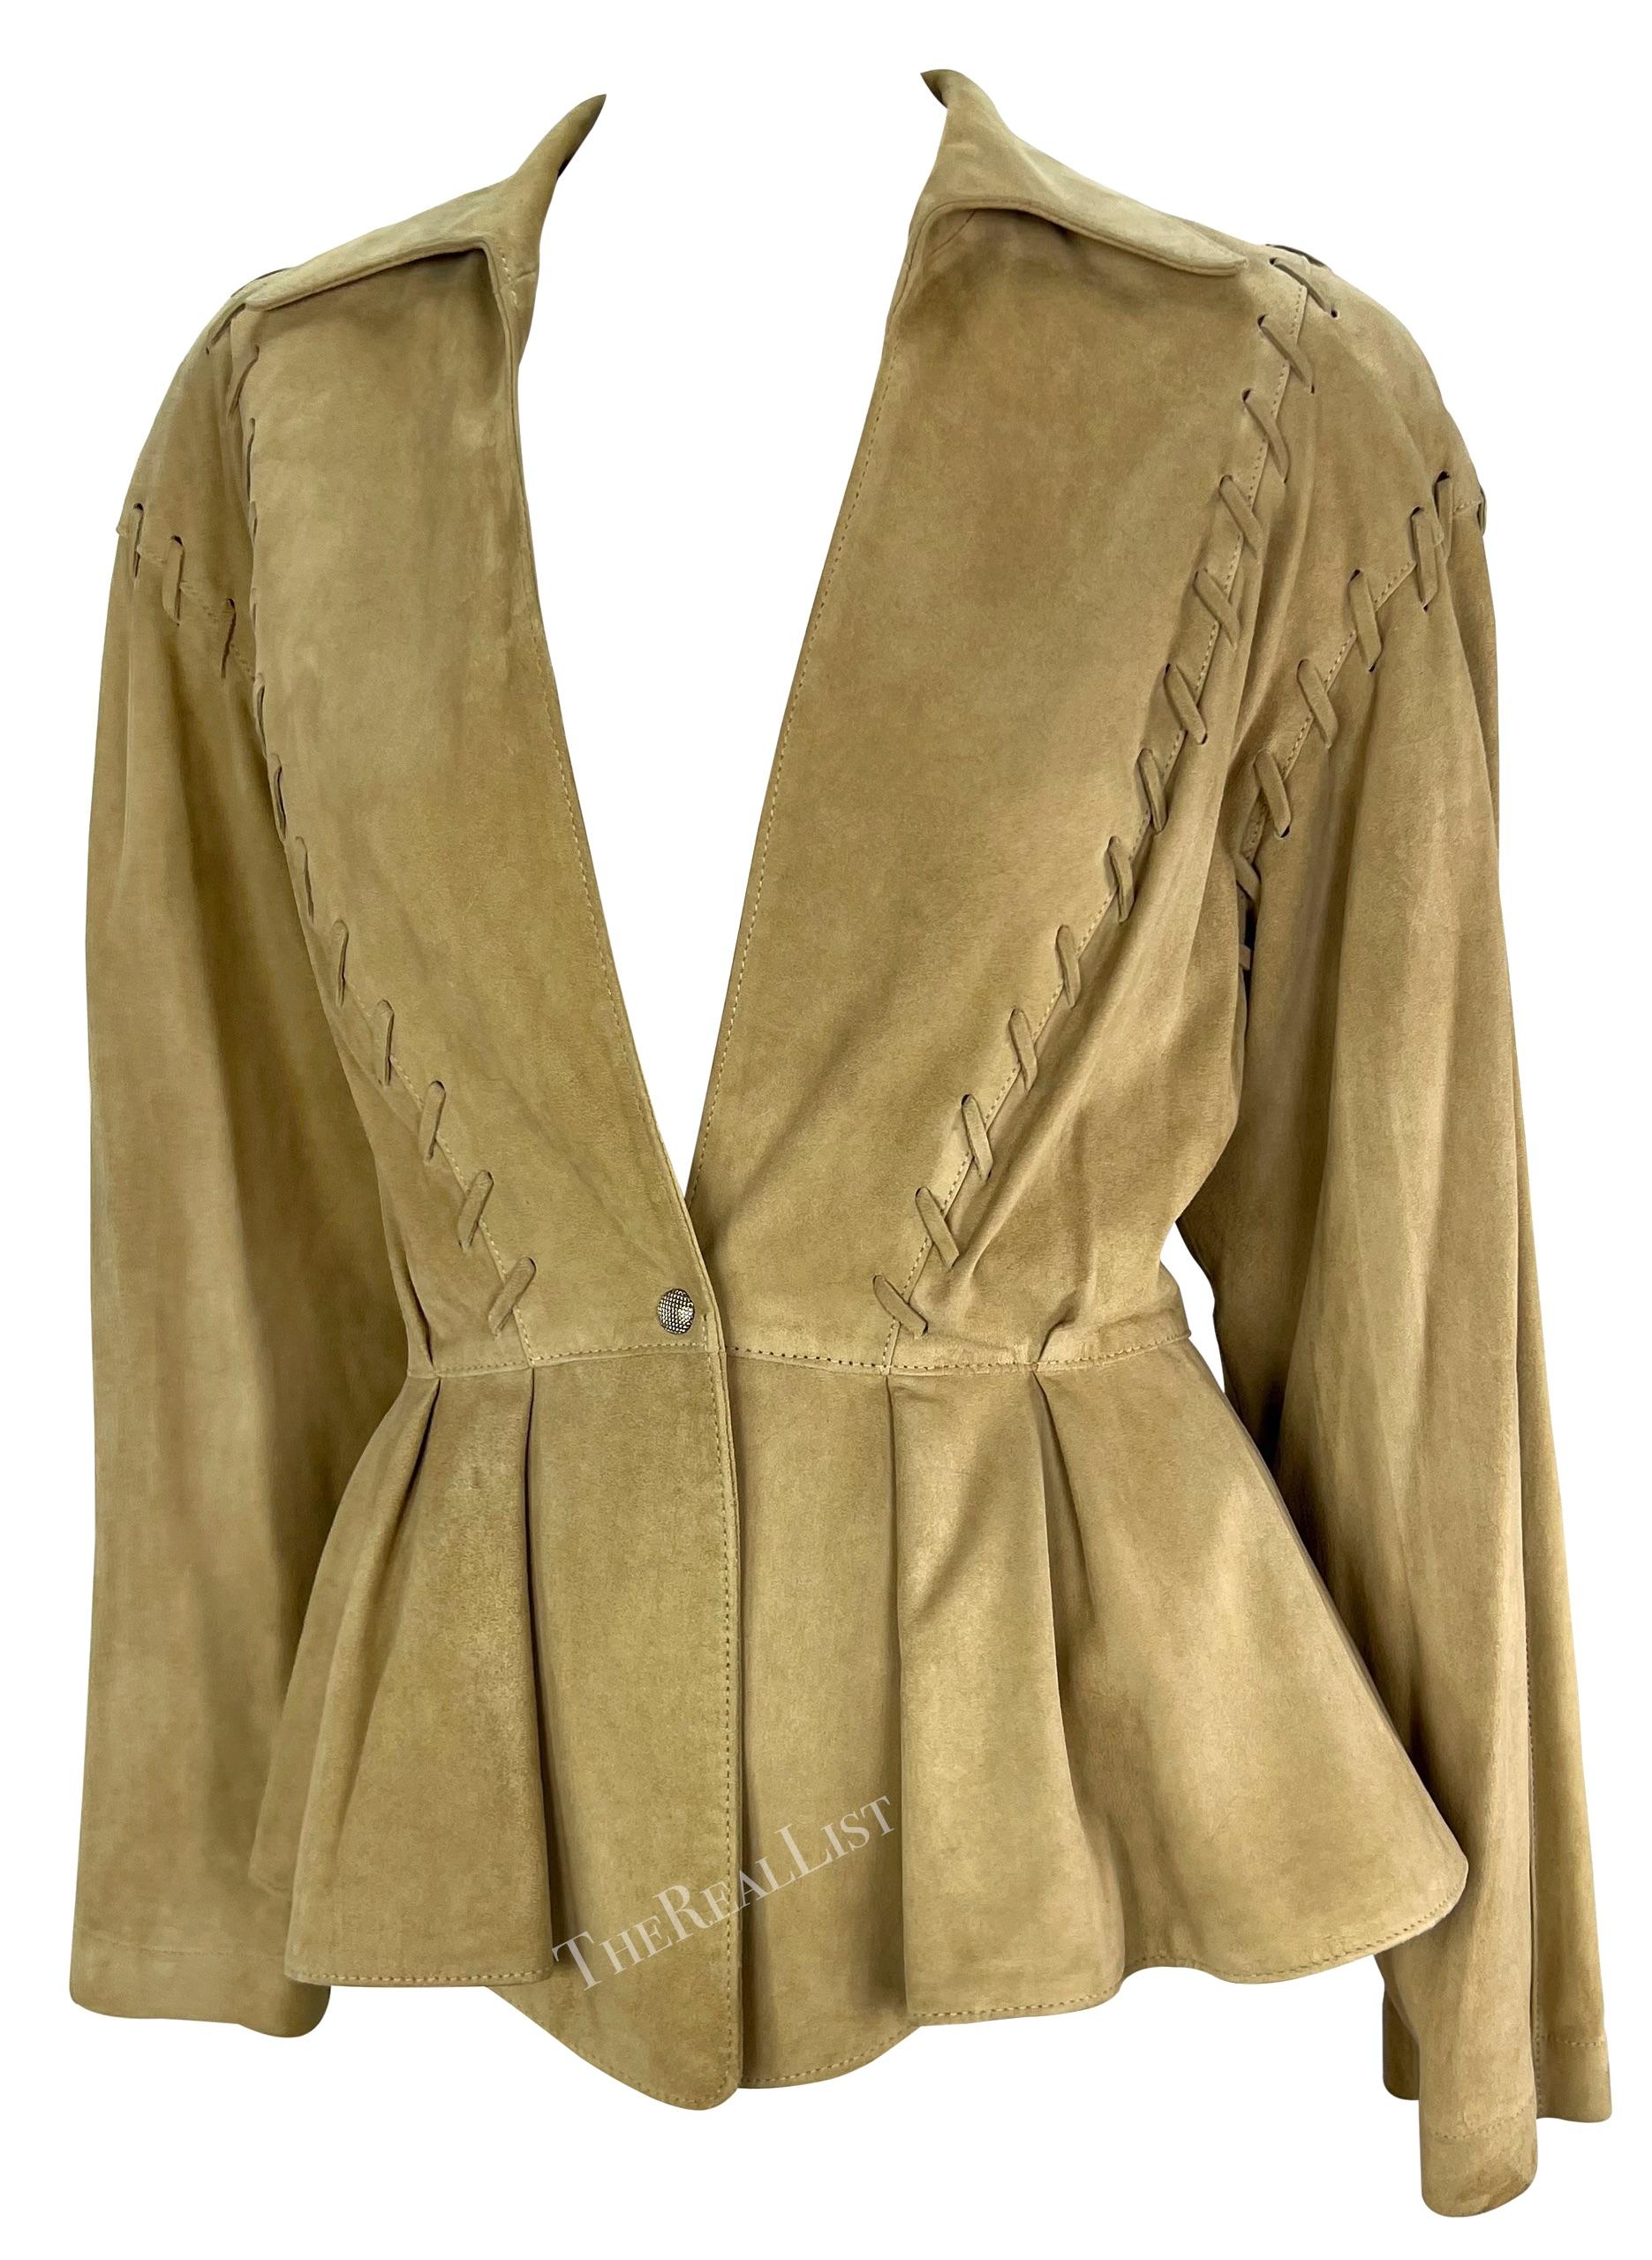 This stunning tan suede jacket by Thierry Mugler is a standout piece from 1990s. Crafted entirely from light tan suede, the jacket features a single snap button closure at the front, a plunging neckline, and a fold-over collar for added elegance.